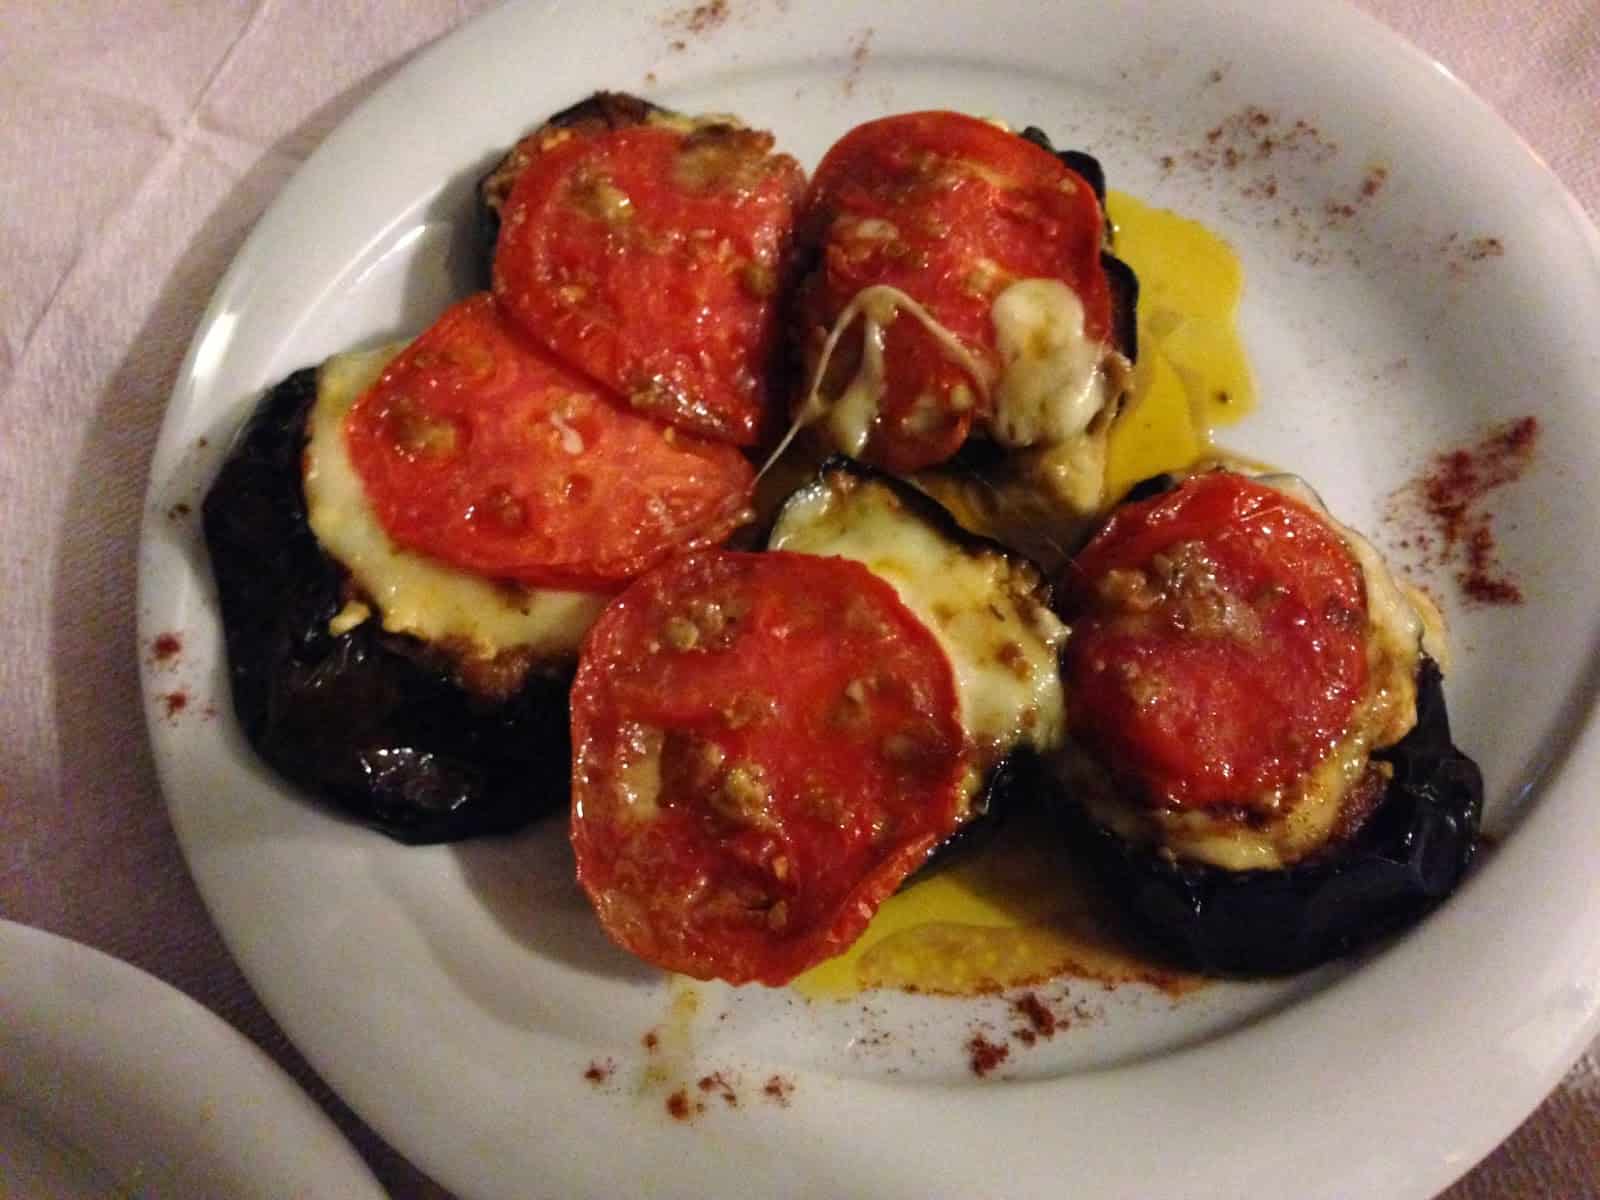 Baked eggplants with cheese and tomato at Bahari in Chios, Greece